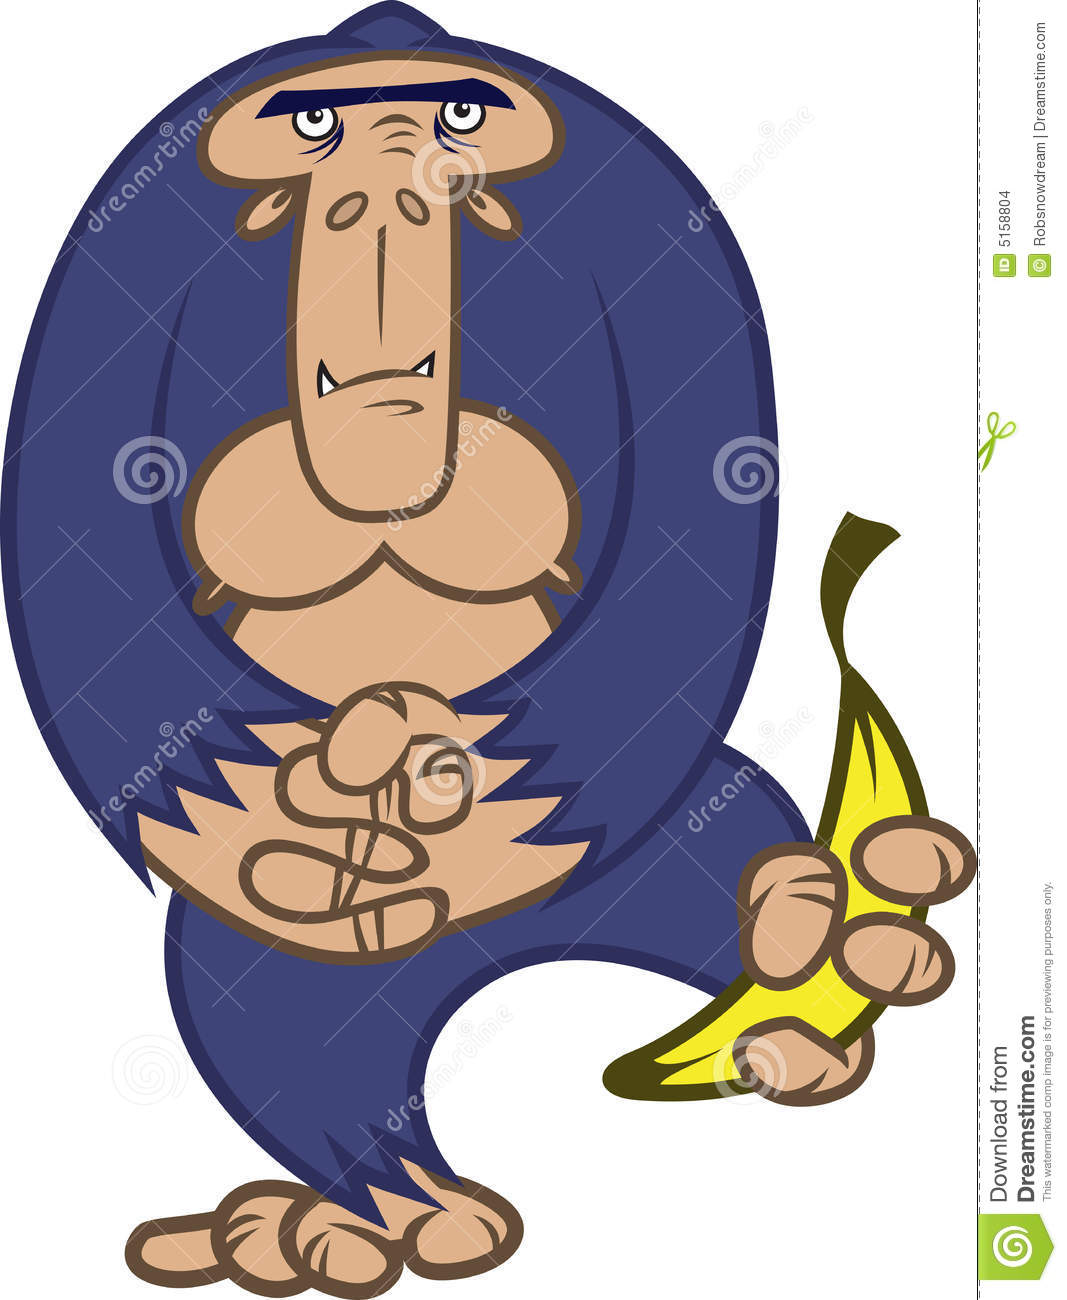 More Similar Stock Images Of   Gorilla With Banana